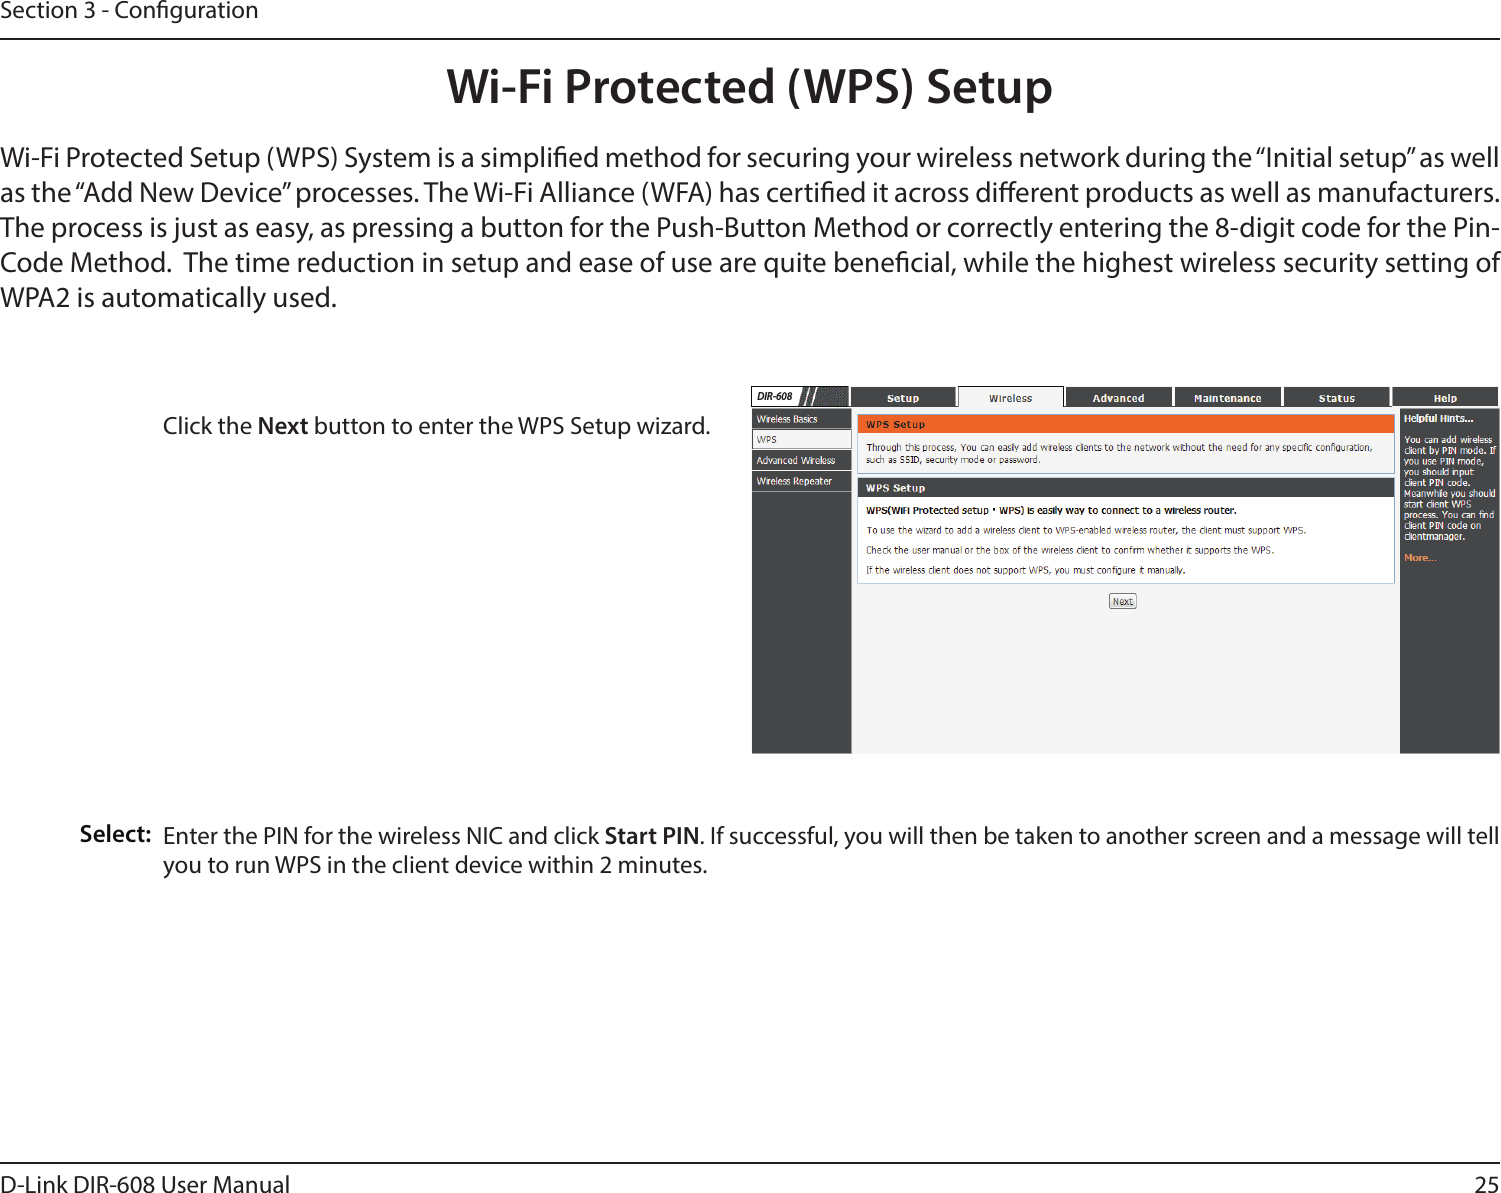 25D-Link DIR-608 User ManualSection 3 - CongurationWi-Fi Protected (WPS) SetupClick the Next button to enter the WPS Setup wizard. Enter the PIN for the wireless NIC and click Start PIN. If successful, you will then be taken to another screen and a message will tell you to run WPS in the client device within 2 minutes.Select:Wi-Fi Protected Setup (WPS) System is a simplied method for securing your wireless network during the “Initial setup” as well as the “Add New Device” processes. The Wi-Fi Alliance (WFA) has certied it across dierent products as well as manufacturers. The process is just as easy, as pressing a button for the Push-Button Method or correctly entering the 8-digit code for the Pin-Code Method.  The time reduction in setup and ease of use are quite benecial, while the highest wireless security setting of WPA2 is automatically used.DIR-608